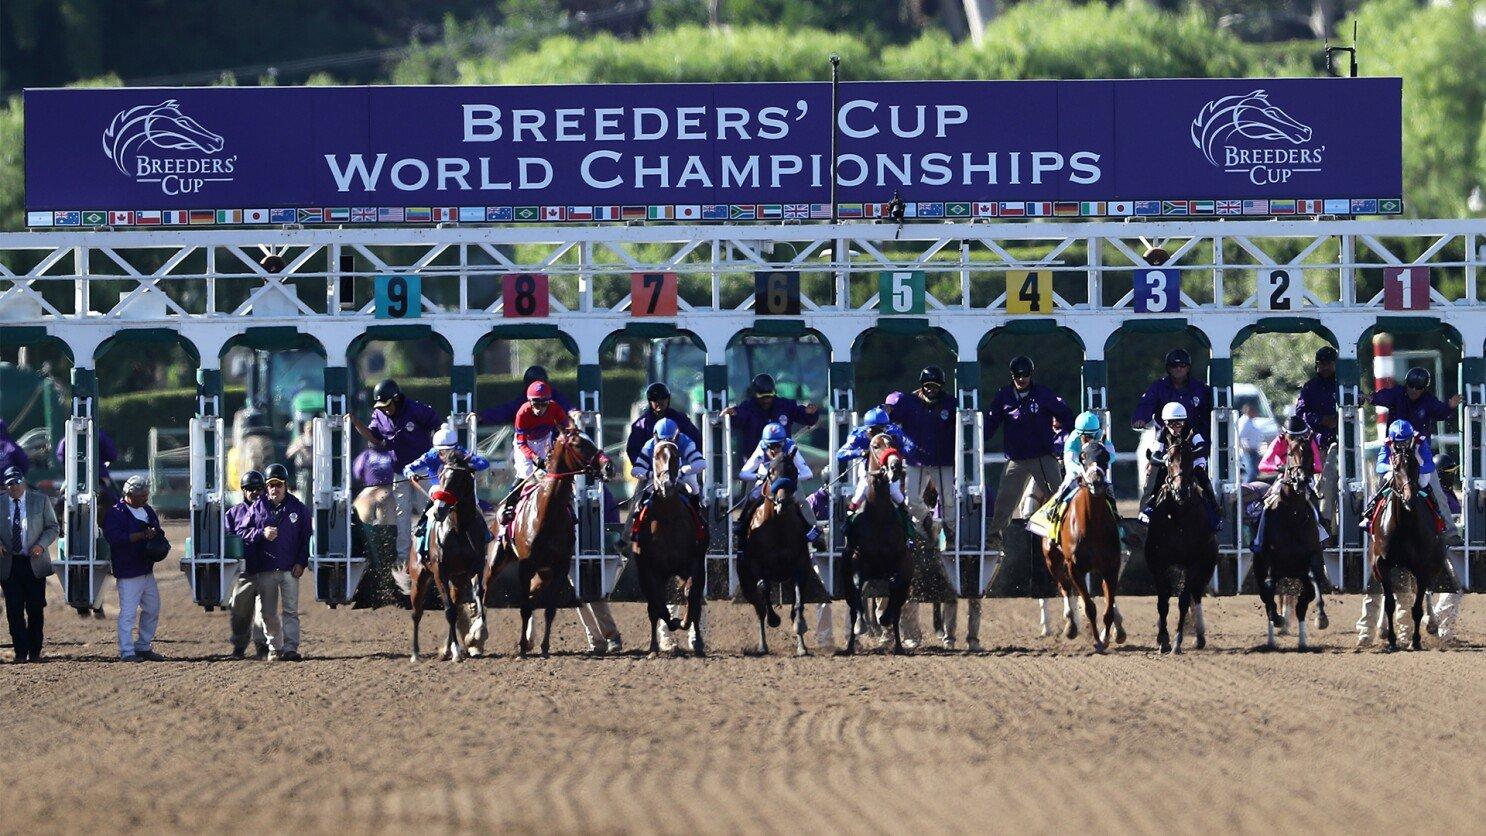 Breeders Cup starting gate